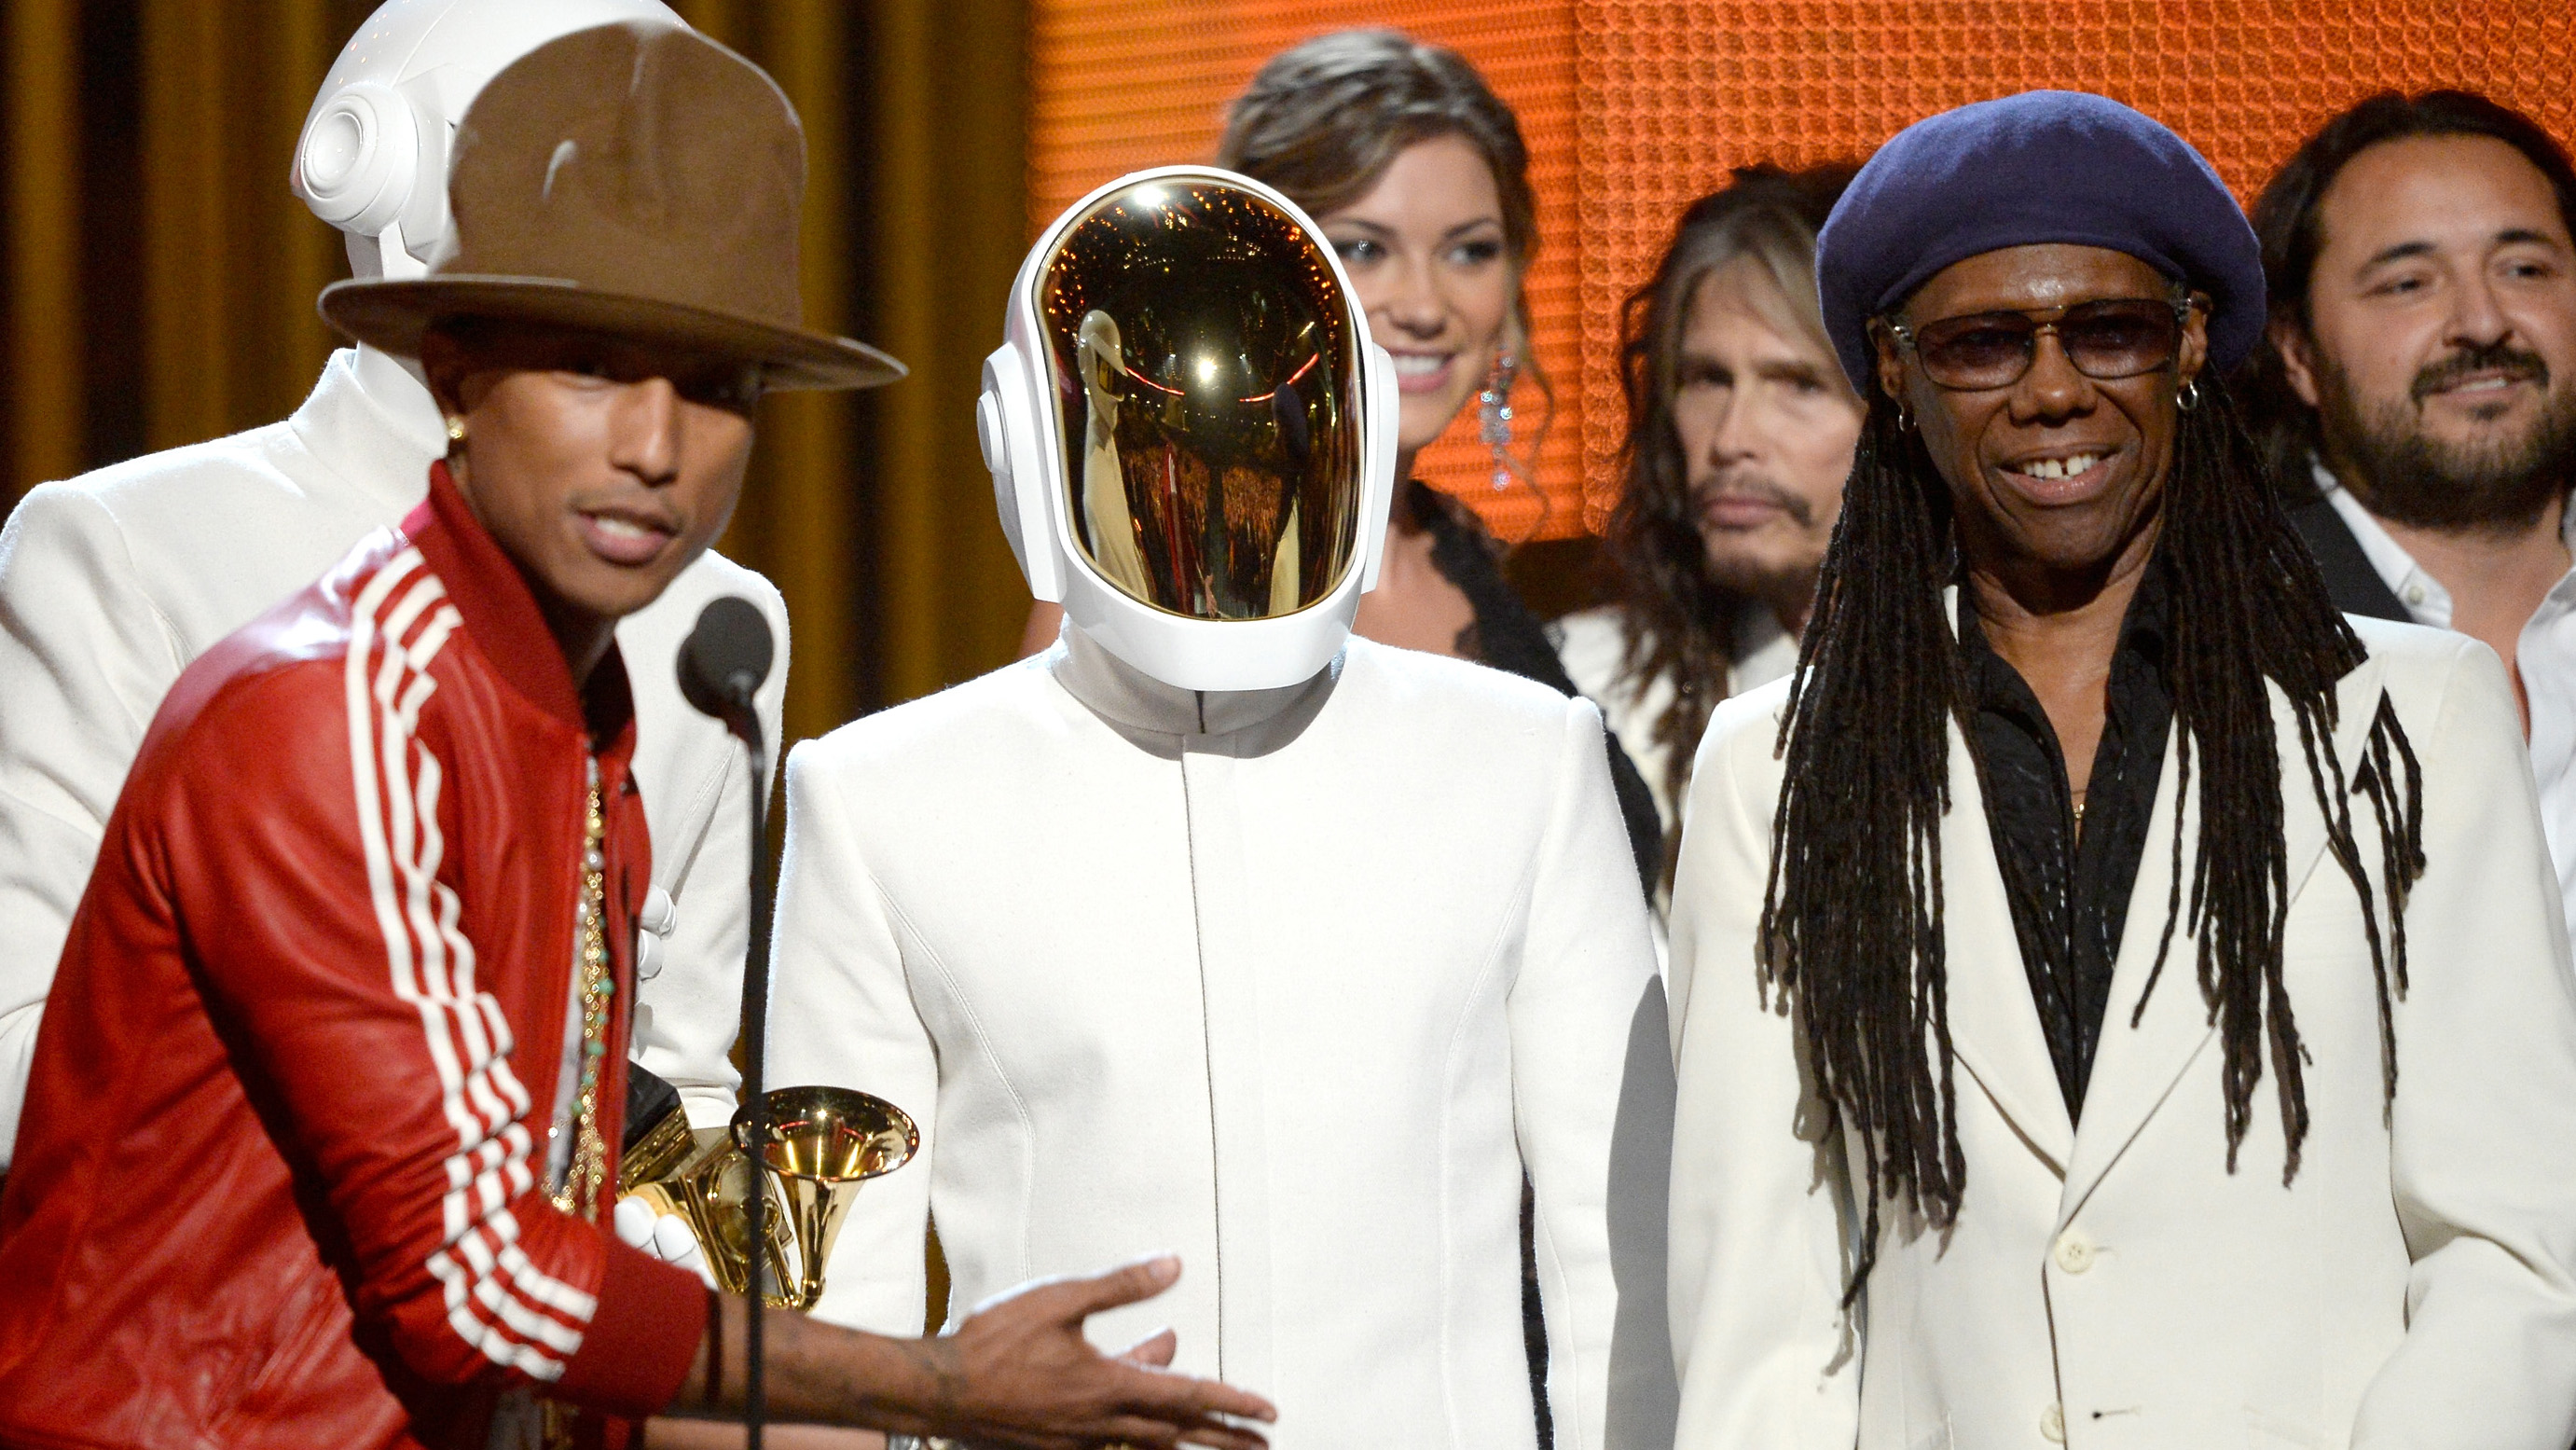 LOS ANGELES, CA - JANUARY 26:(L-R) Musicians Pharrell Williams, Thomas Bangalter and Guy-Manuel De Homem-Christo of Daft Punk, and Nile Rodgers accept the Record of the Year award for &#039;Get Lu